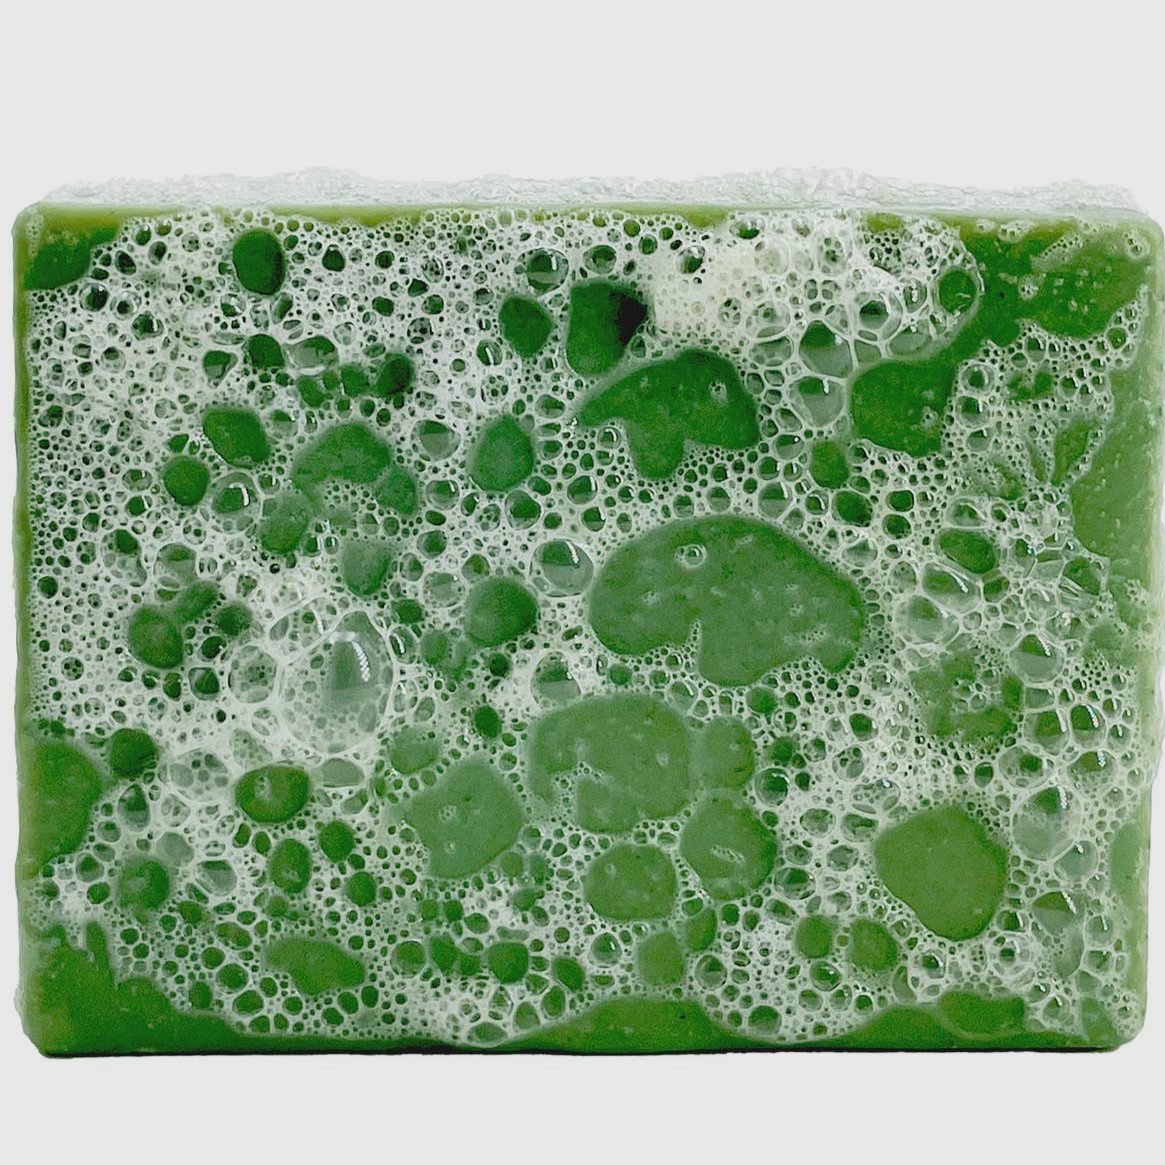 Sapiens Bar Soap Wild Forest - Genuine Design luxury consignment Calgary, Alberta, Canada New & pre-owned clothing, shoes, accessories.